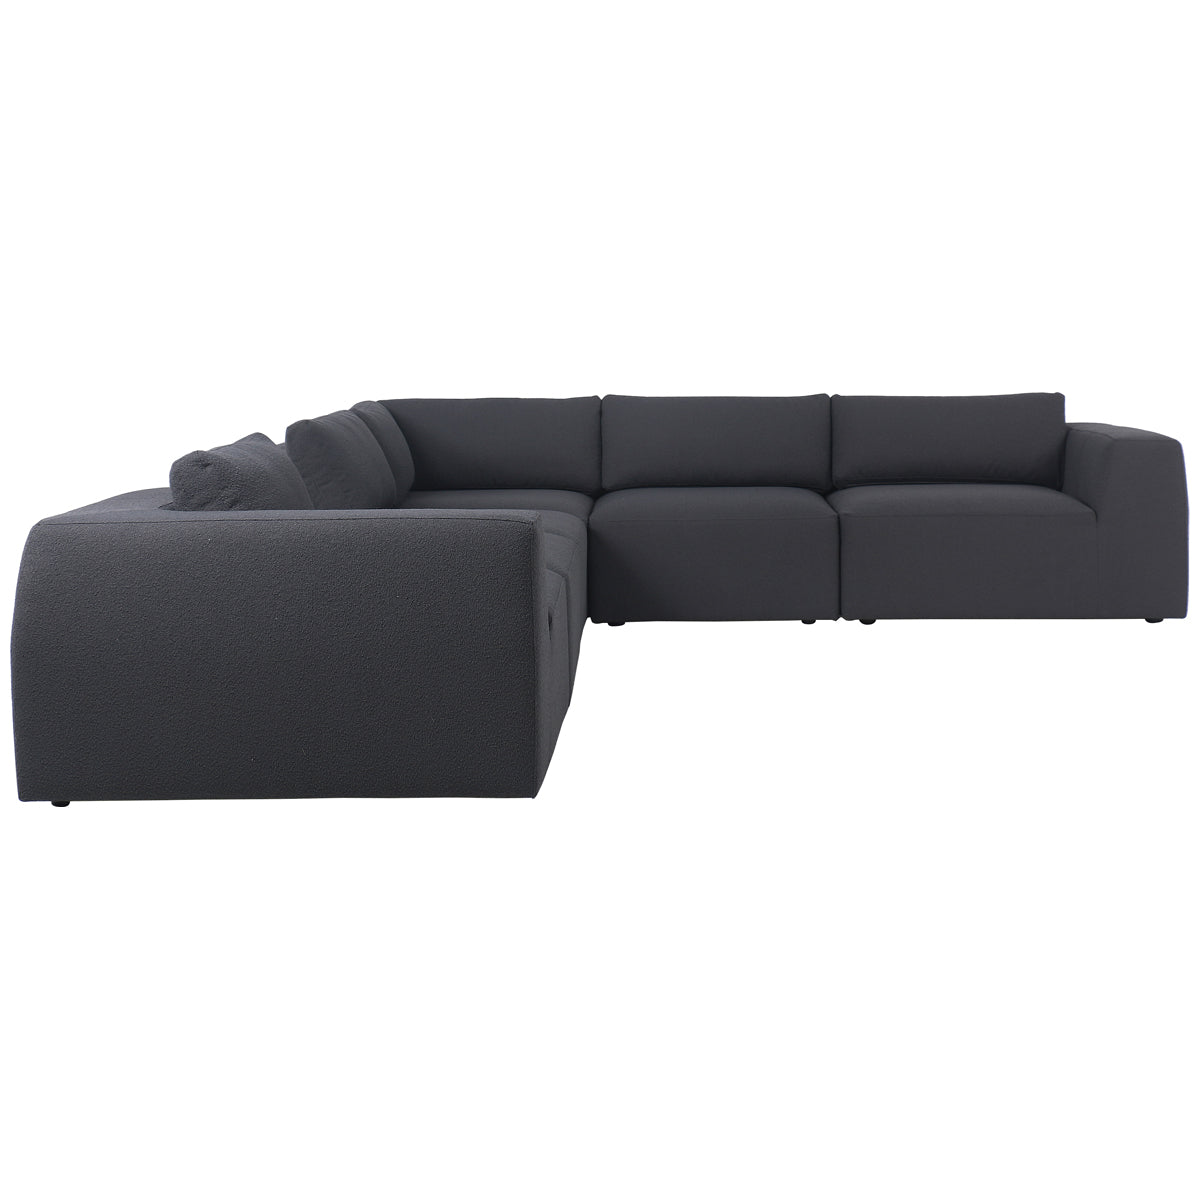 Four Hands Kensington Brylee 5-Piece Sectional with Ottoman